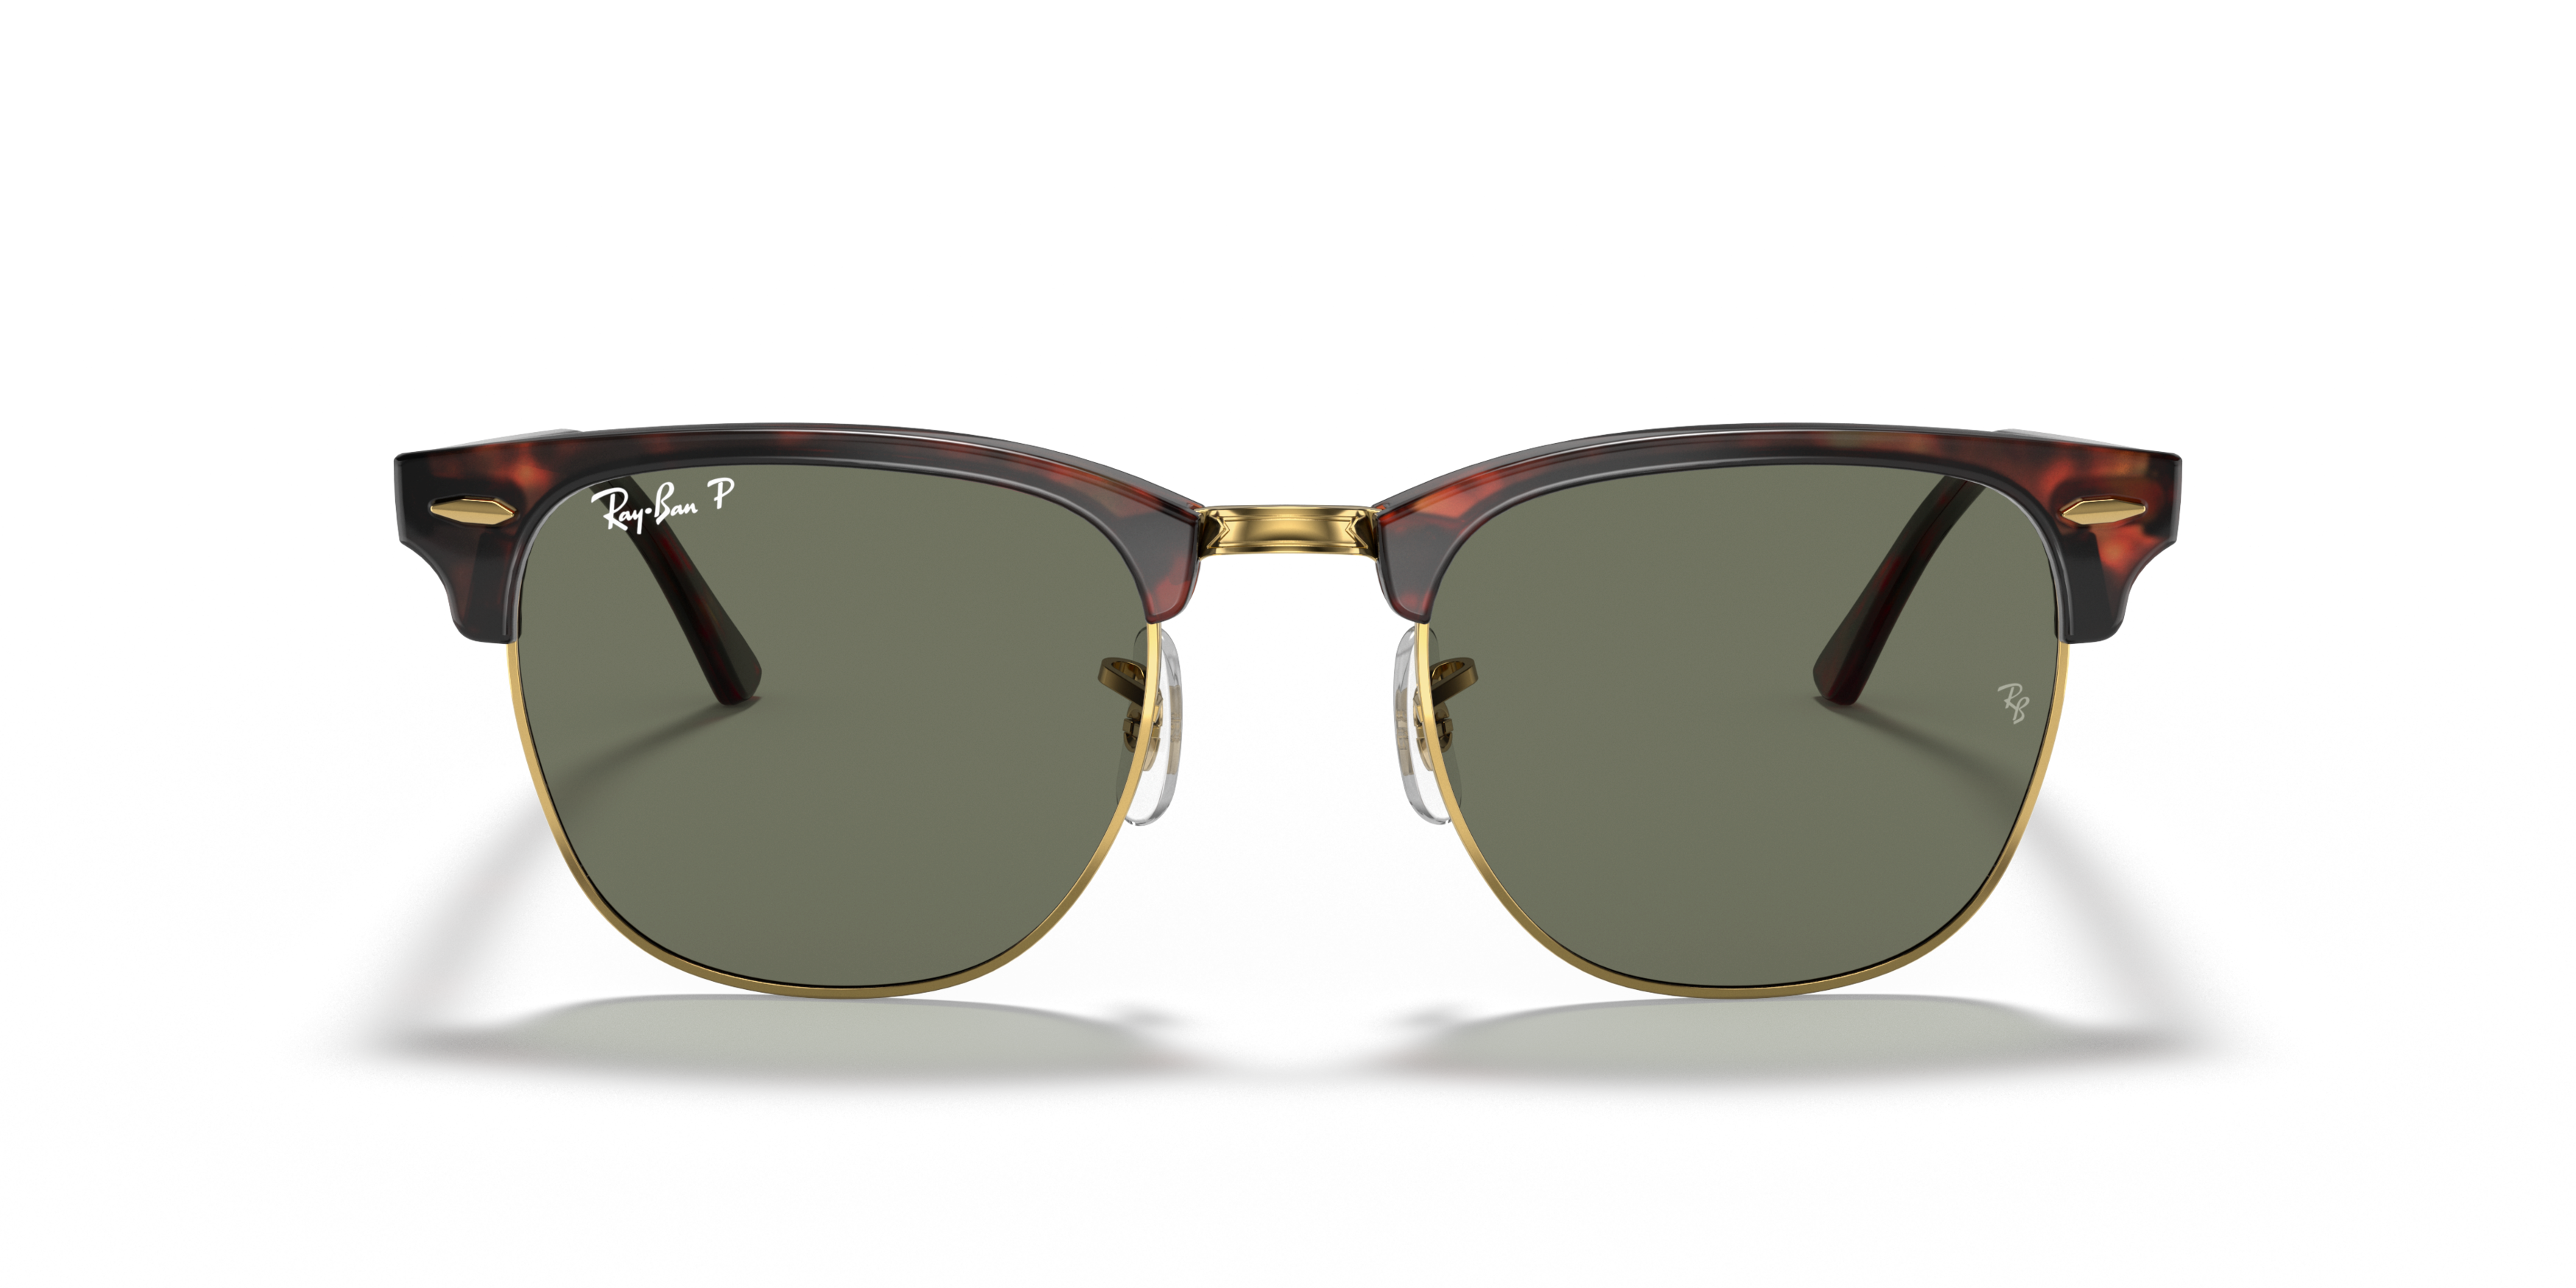 [products.image.front] Ray-Ban Clubmaster Classic RB3016 990/58